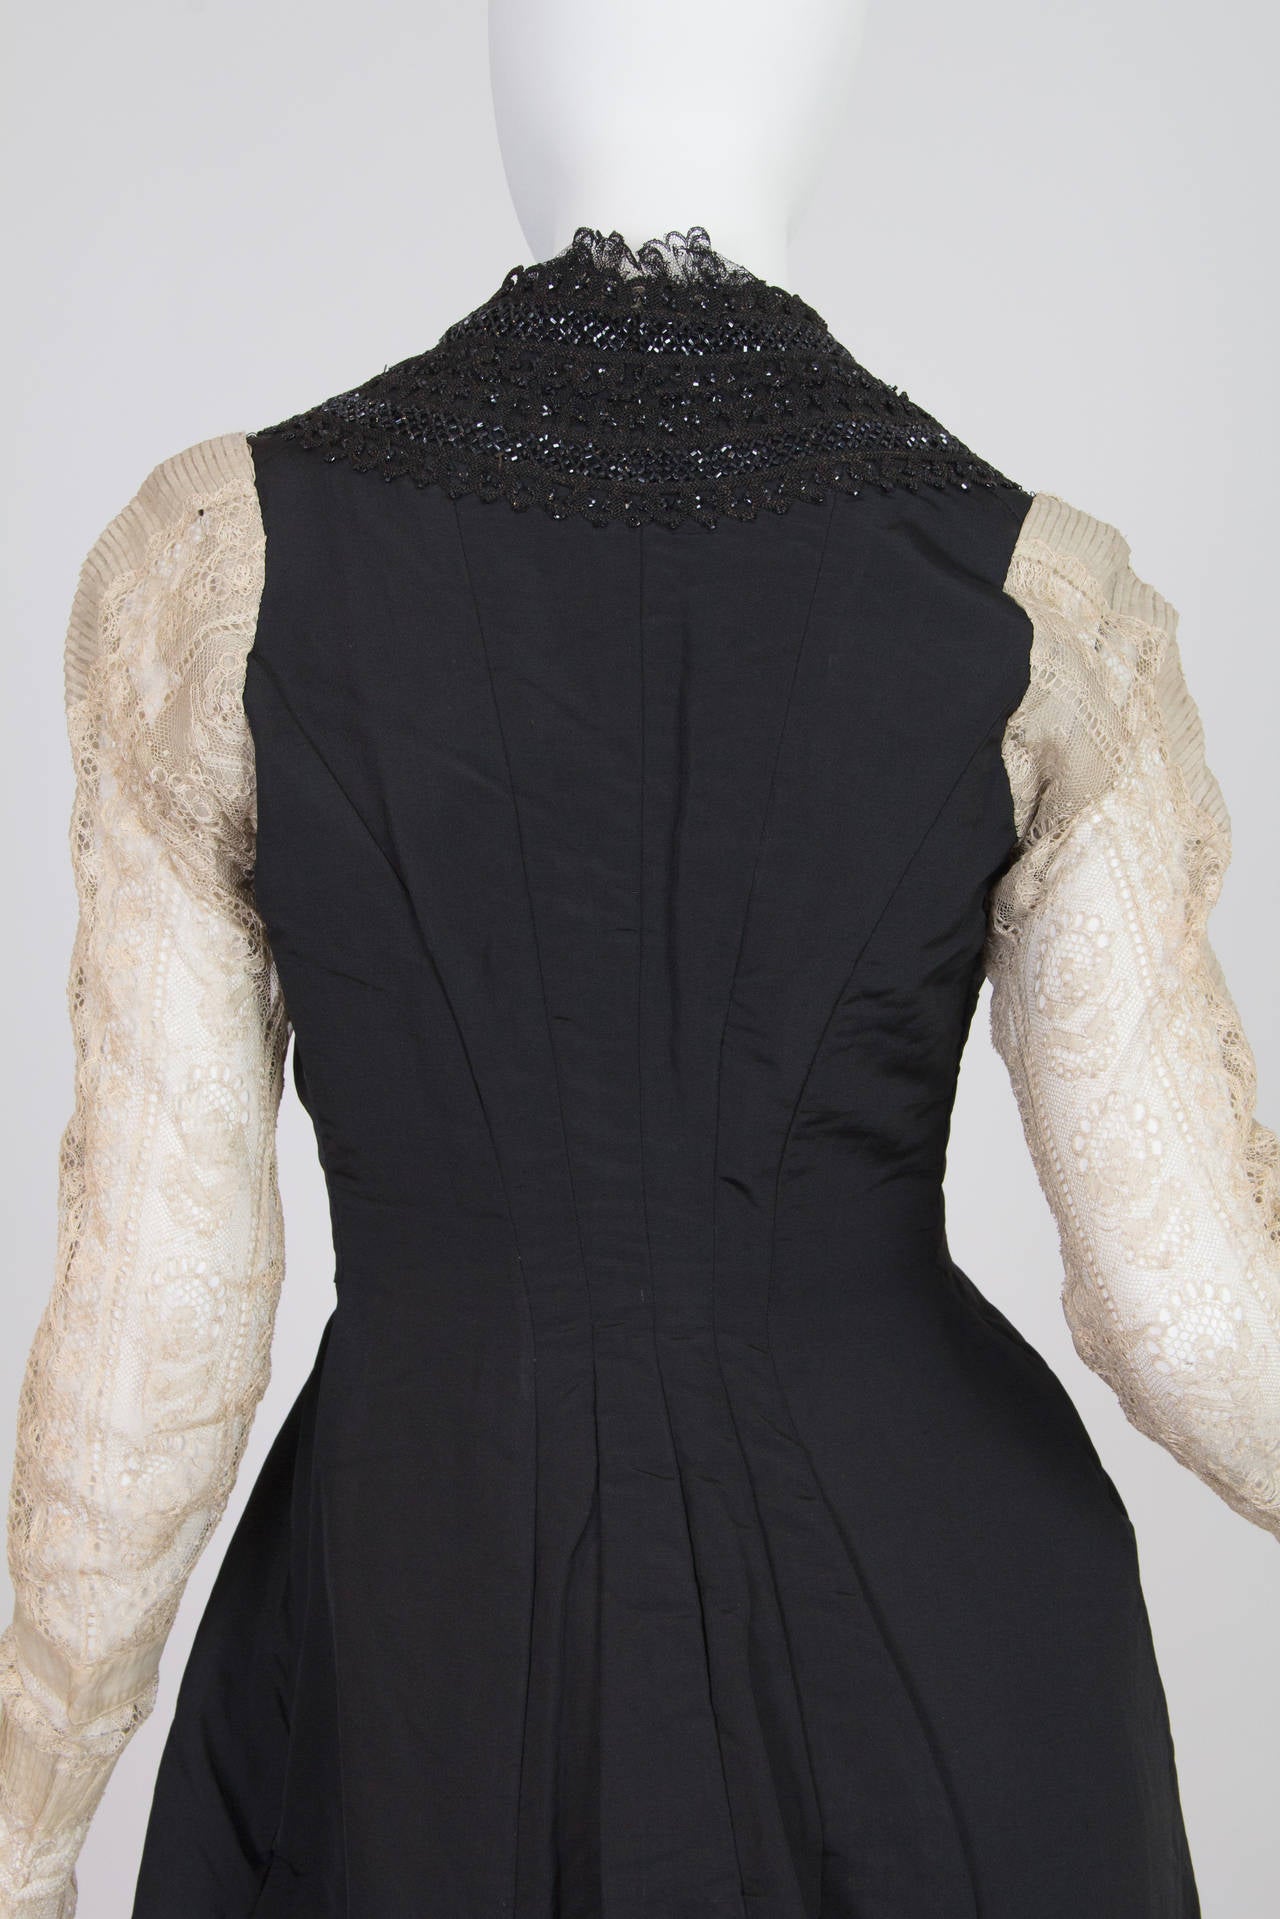 Victorian Black & White Haute Couture Silk Organdy 1880S Bustle Dress With Bead For Sale 1